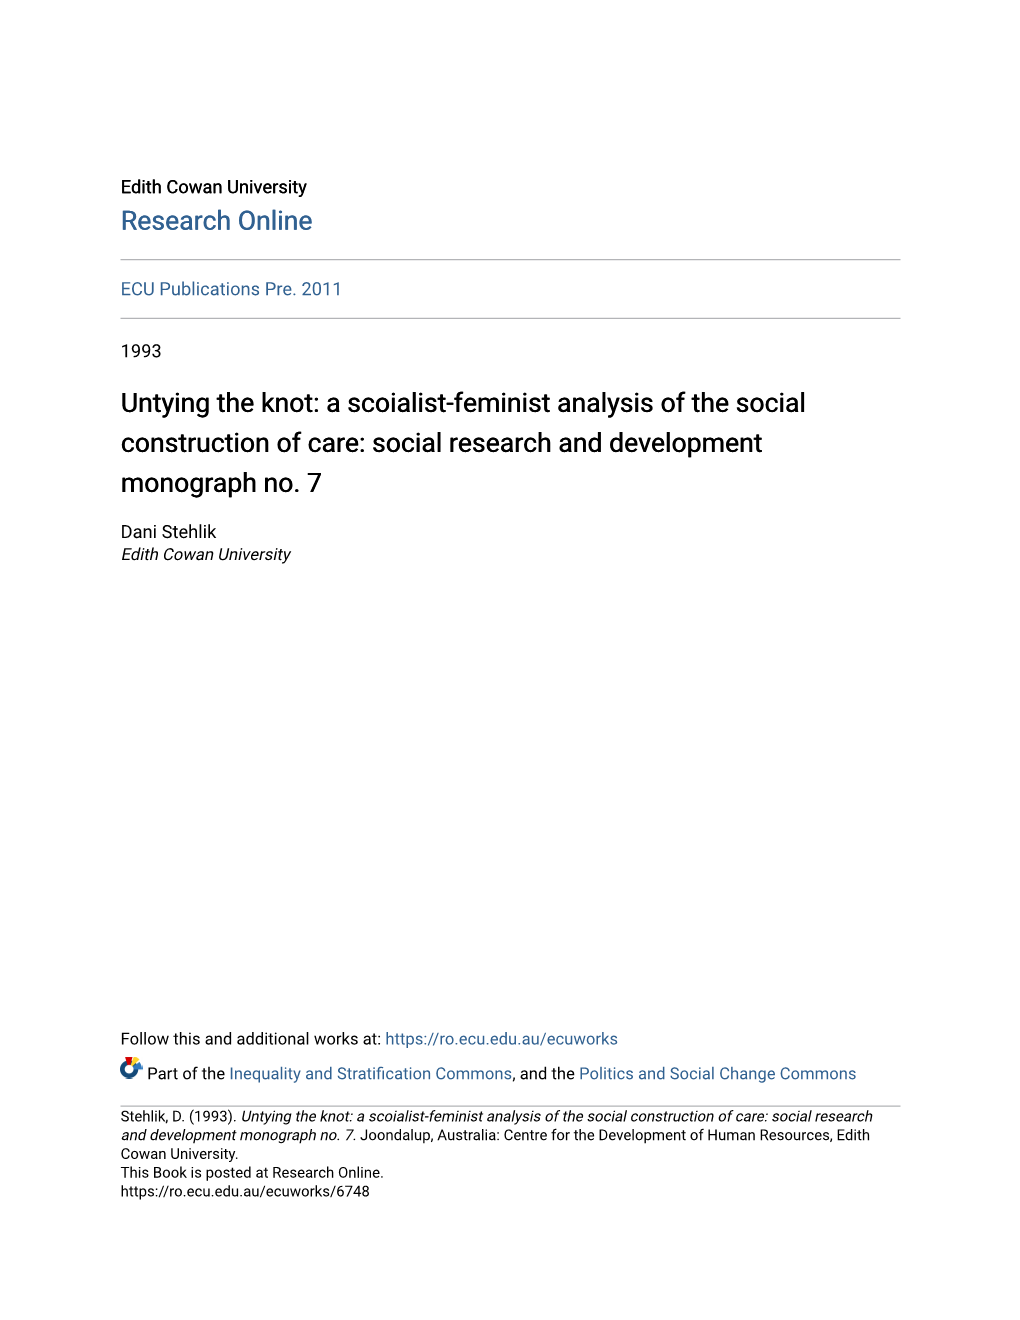 A Scoialist-Feminist Analysis of the Social Construction of Care: Social Research and Development Monograph No